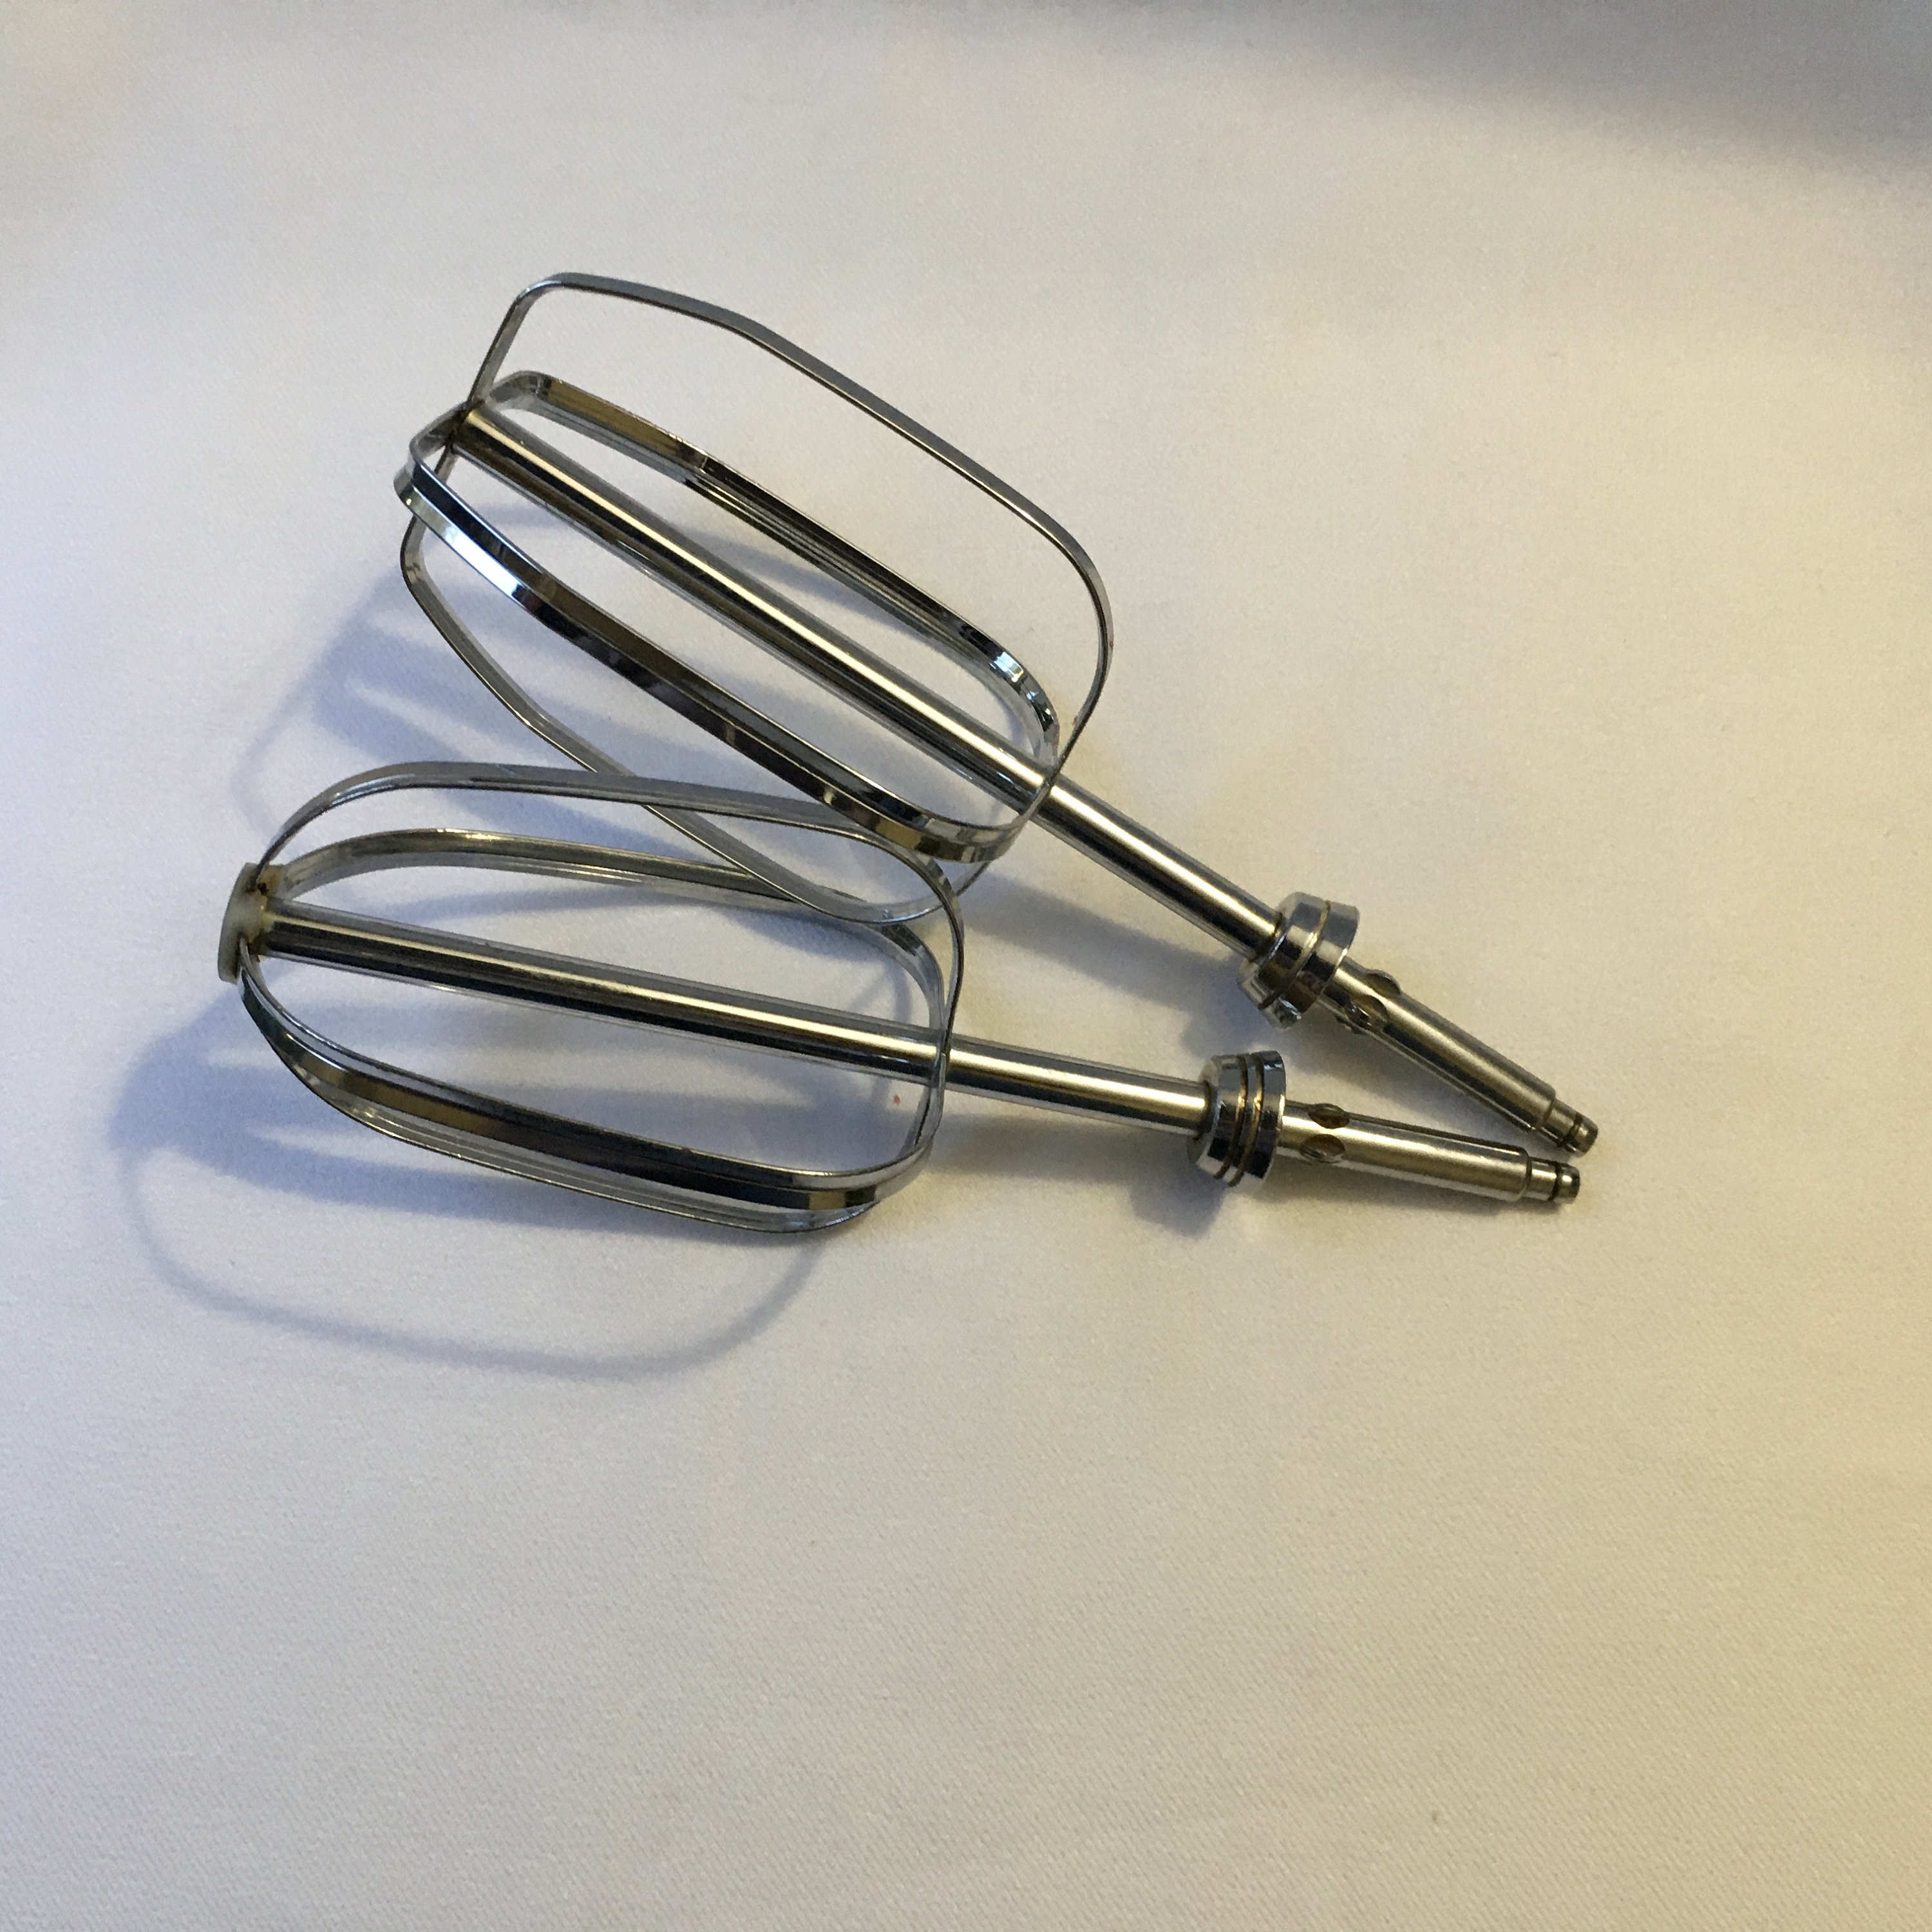 ANTOBLE Replacement Beaters for Sunbeam Mixmaster 47948 Hand Stand Mixer  Replacement Beaters Attachment Parts for Sunbeam Vintage Mixer Blades Egg